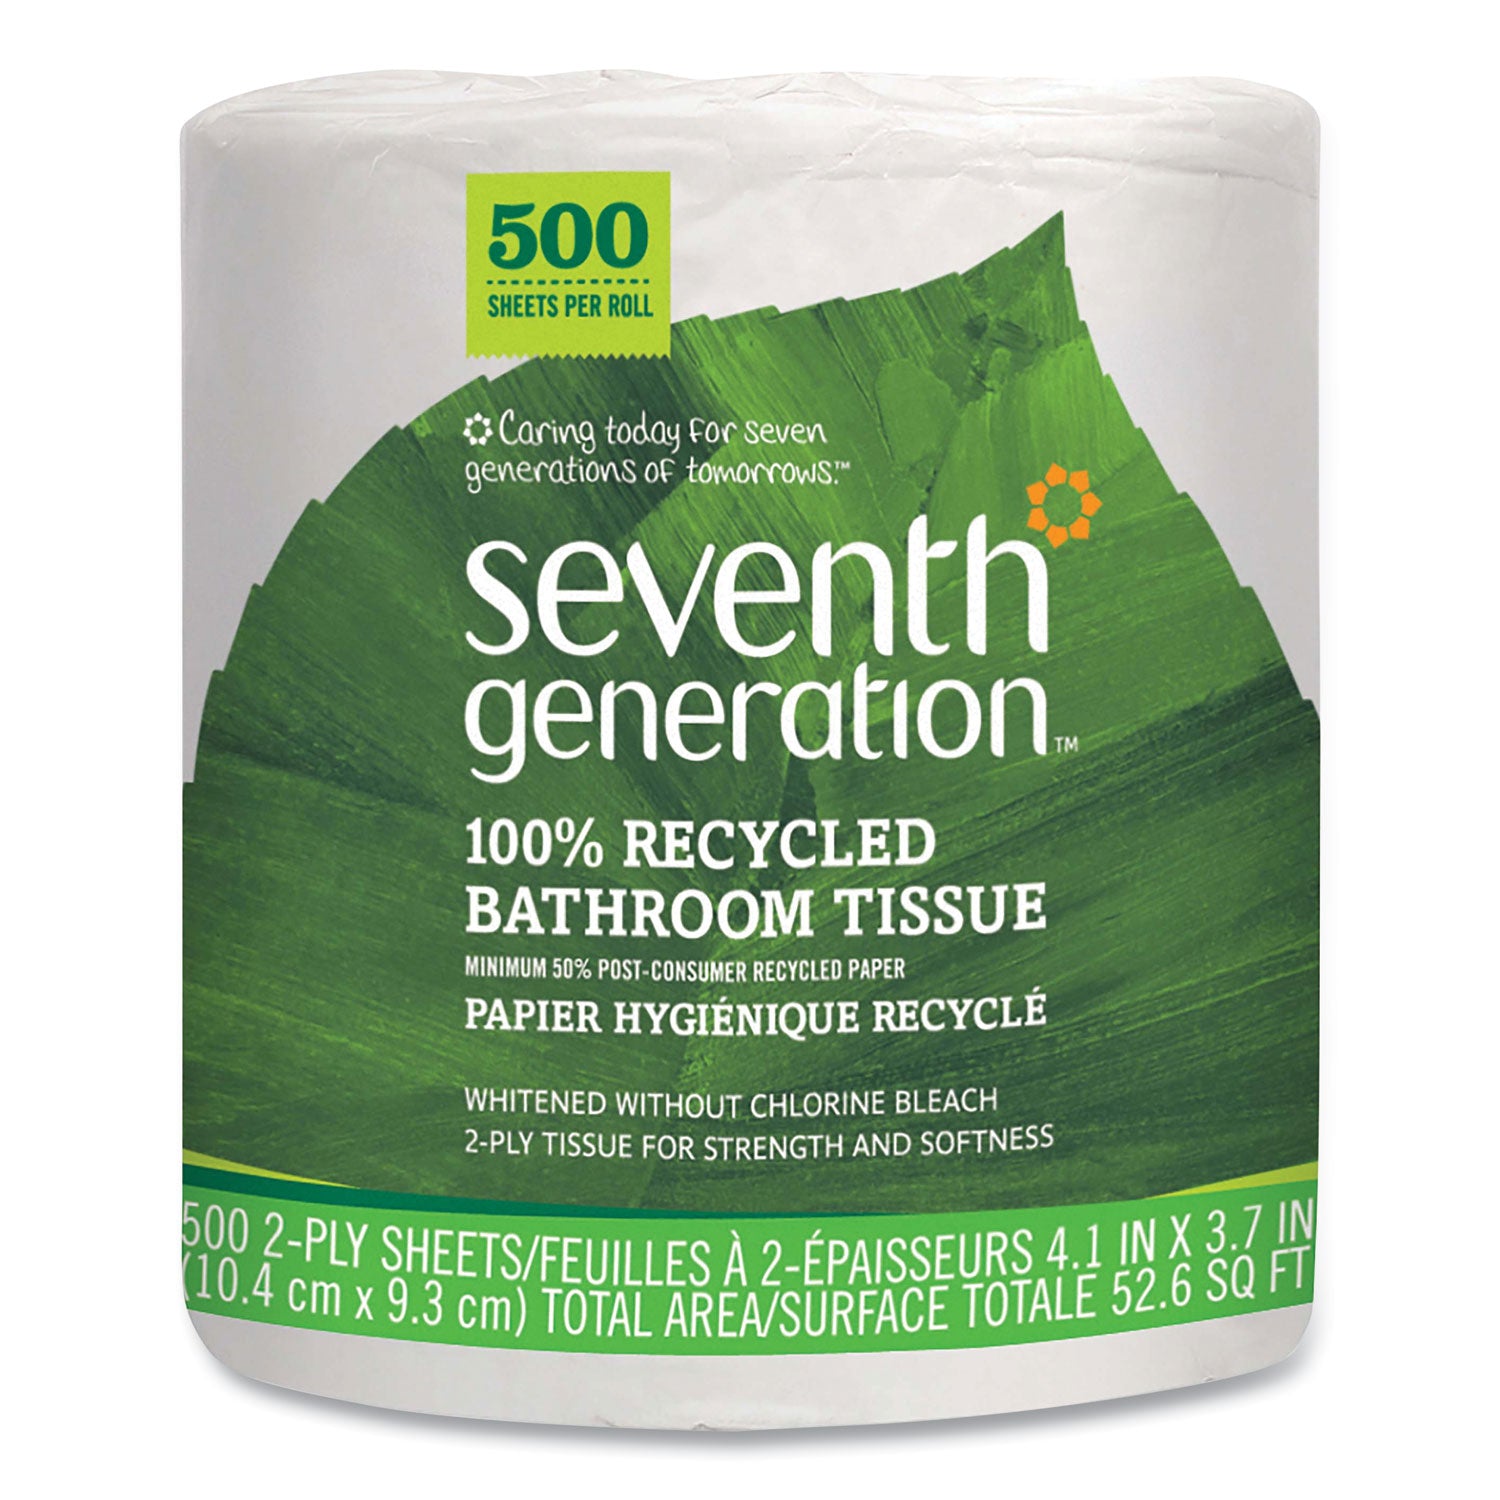 100% Recycled Bathroom Tissue, Septic Safe, Individually Wrapped Rolls, 2-Ply, White, 500 Sheets/Jumbo Roll, 60/Carton - 